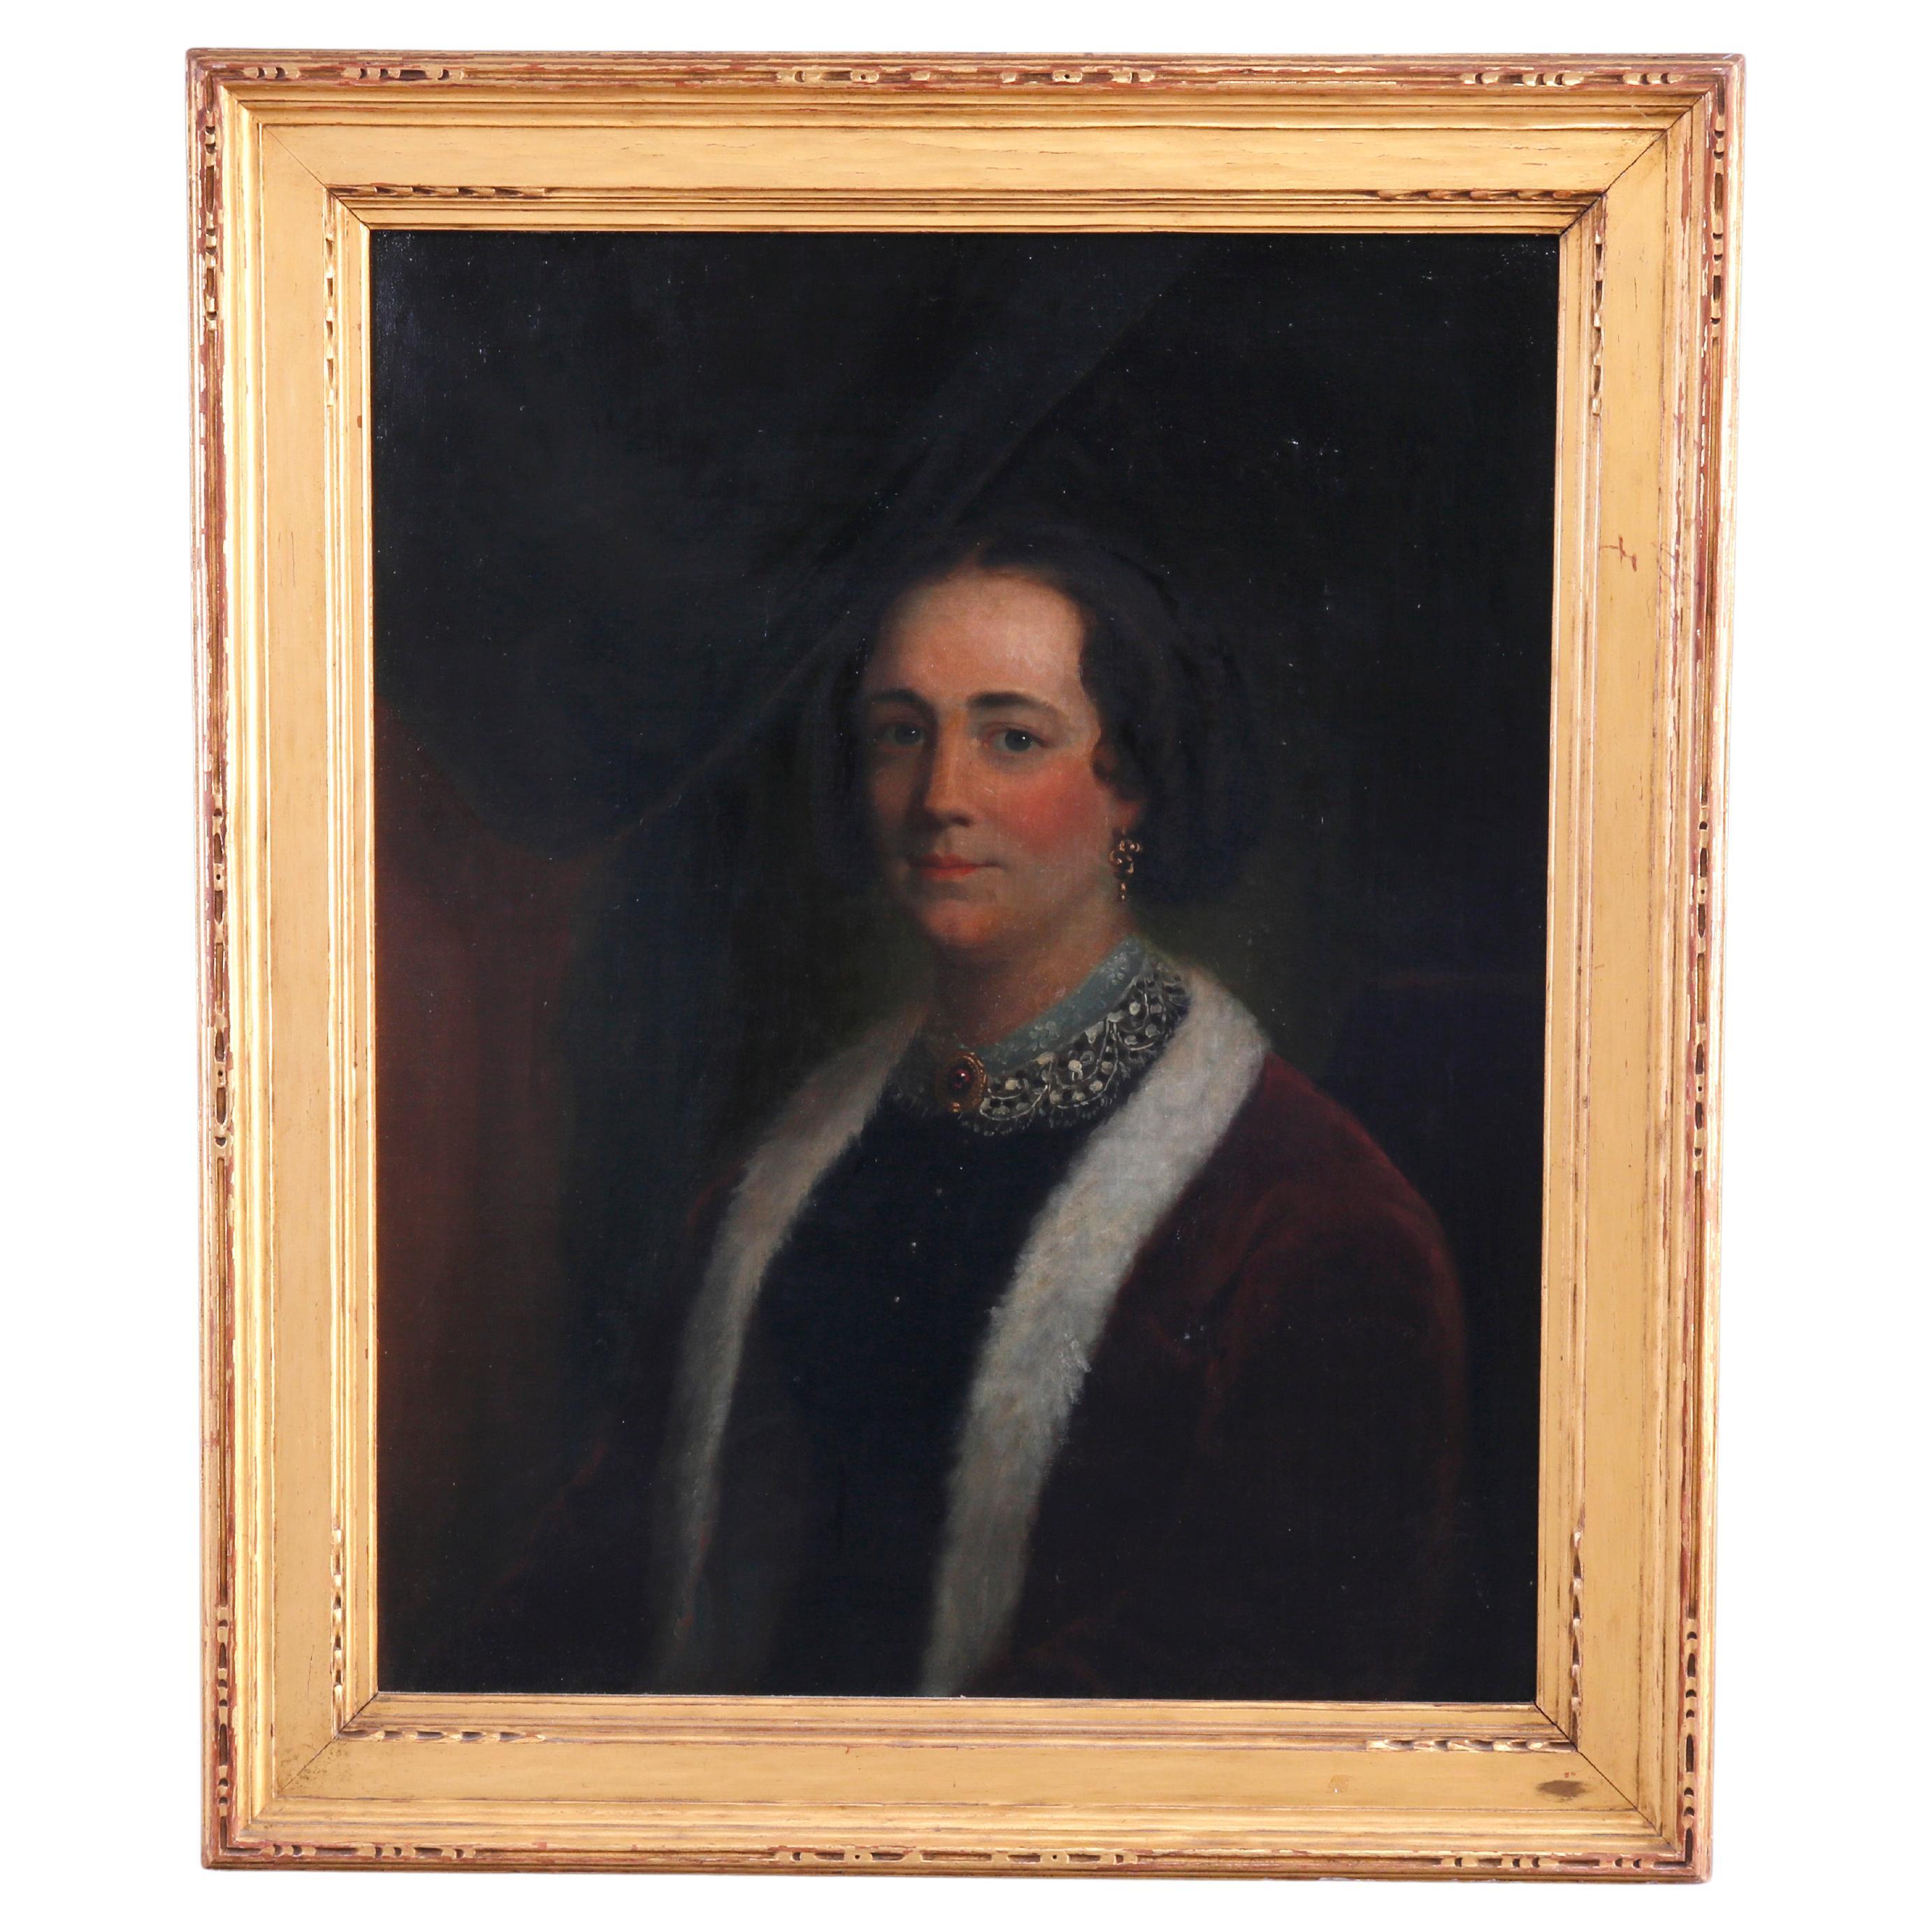 Antique Portrait Painting of a Woman in Newcomb Macklin School Frame, c1910